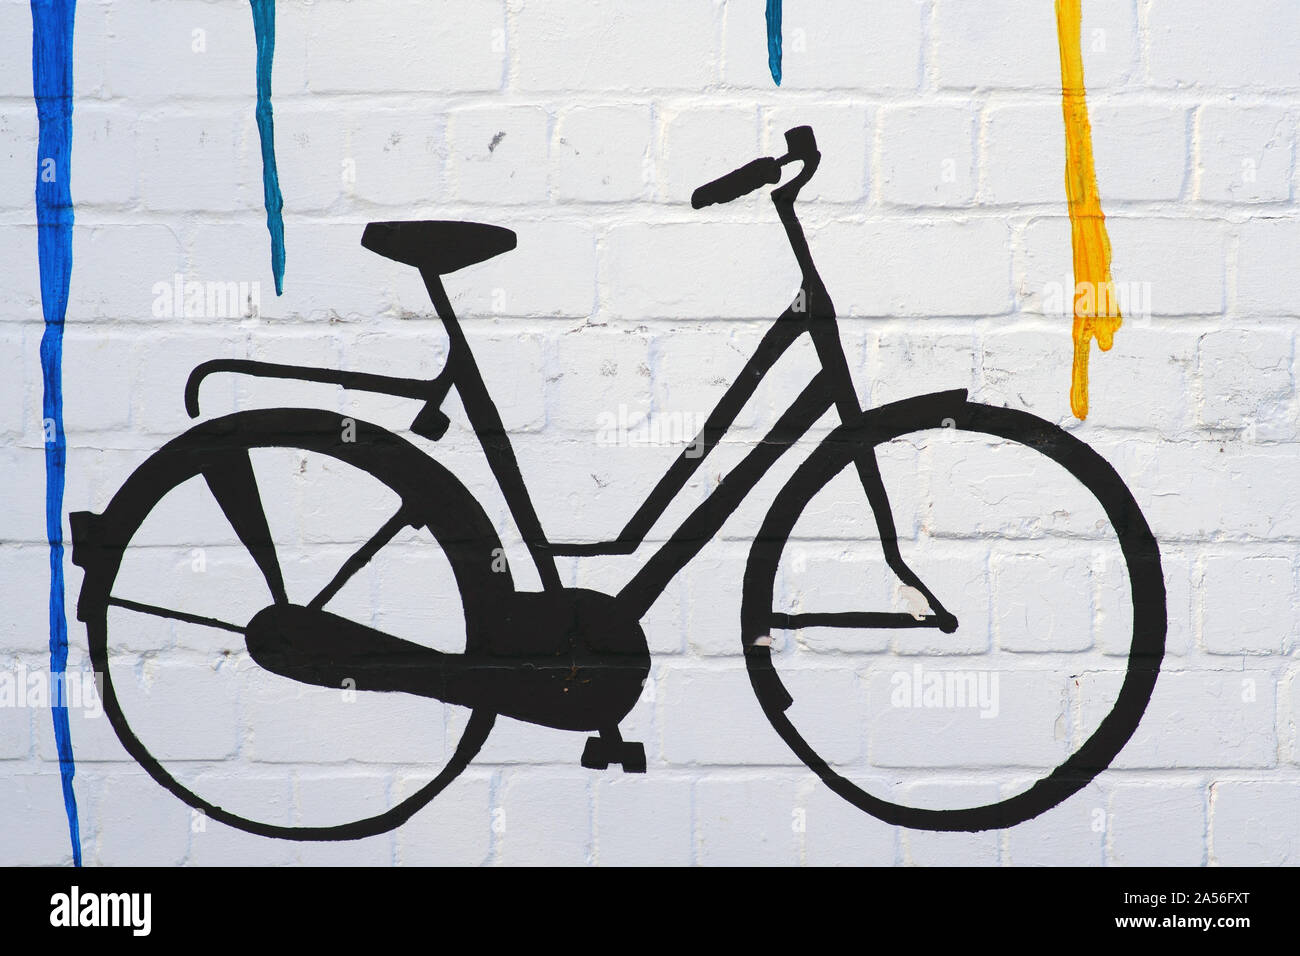 The drawing and the outline of a bicycle on a wall with color gradients. Stock Photo